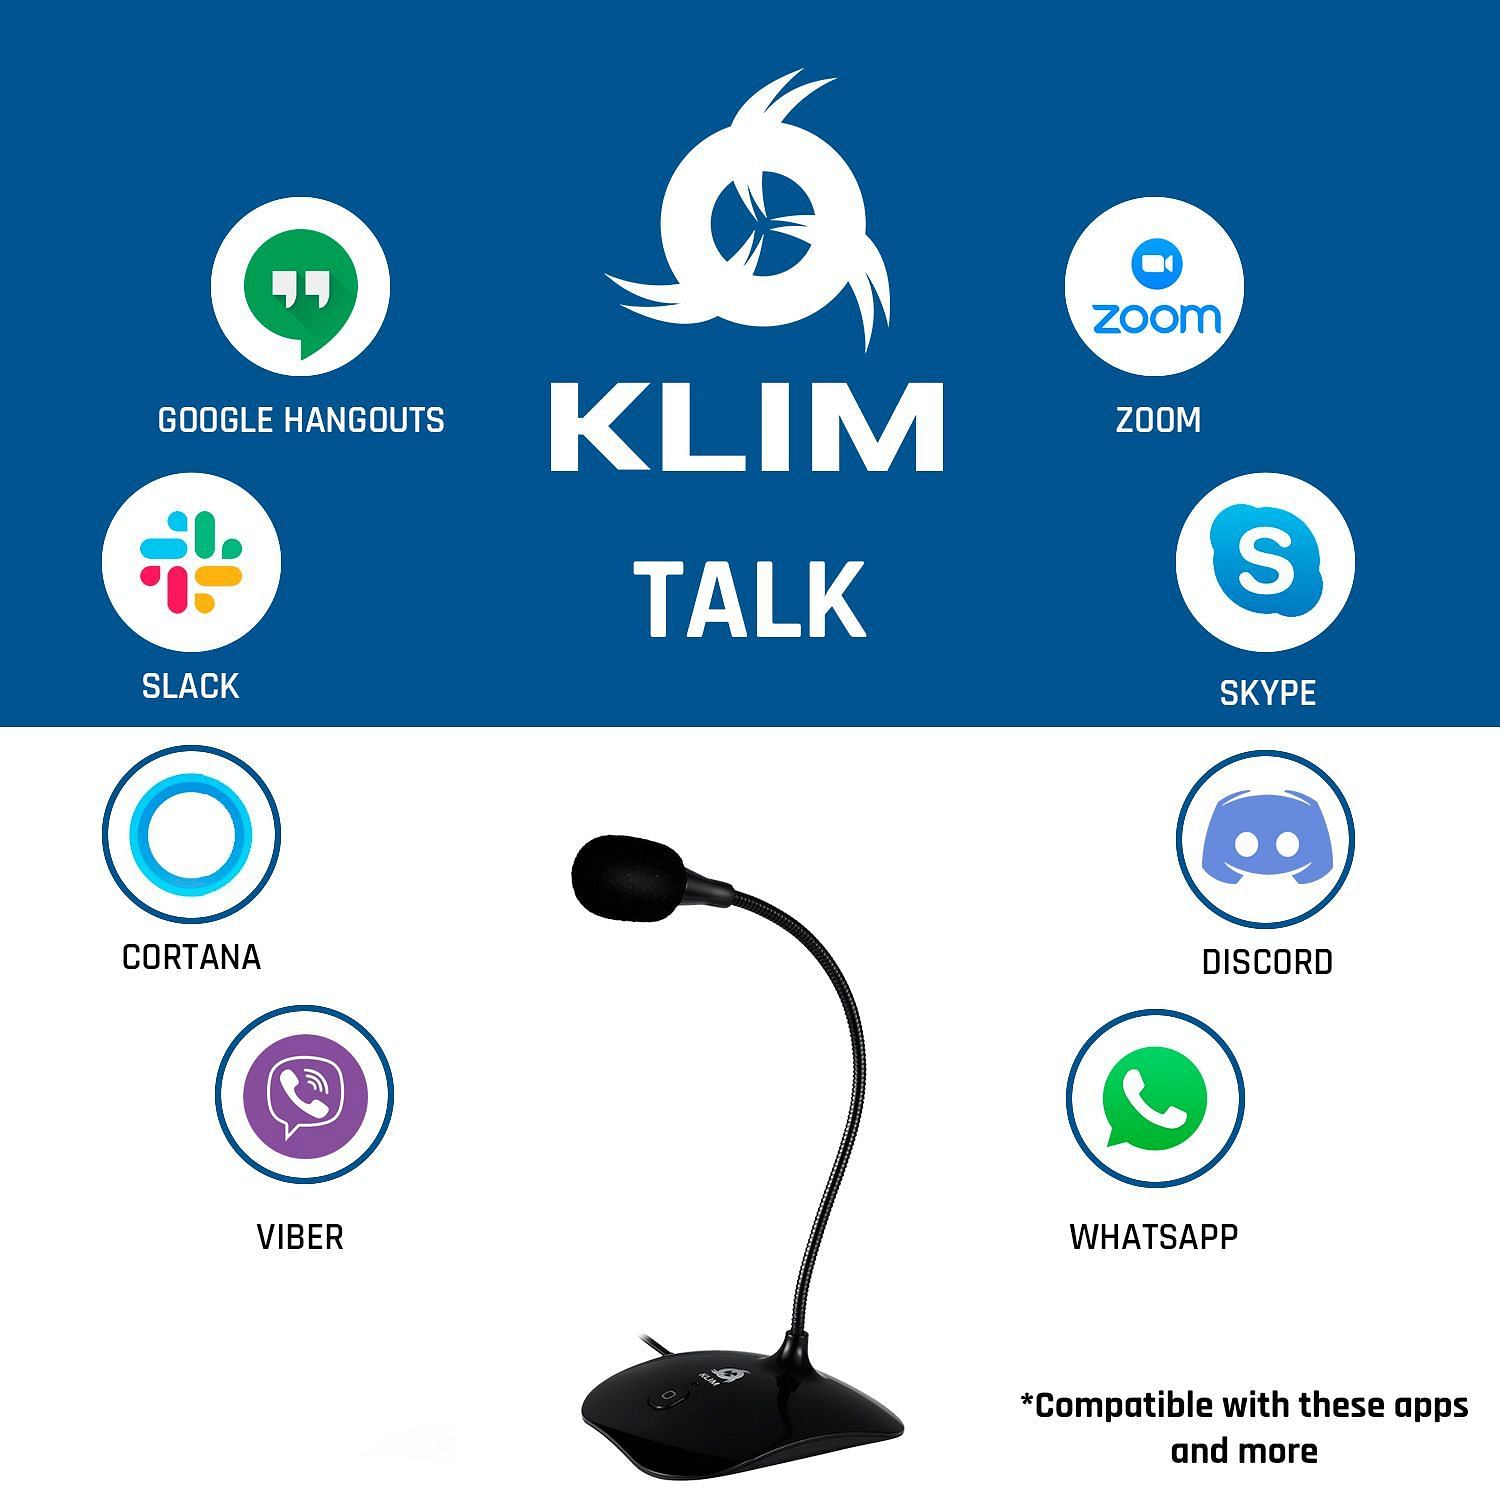 The KLIM Talk works perfectly in all the different types of activities (Image via KLIM Tech)